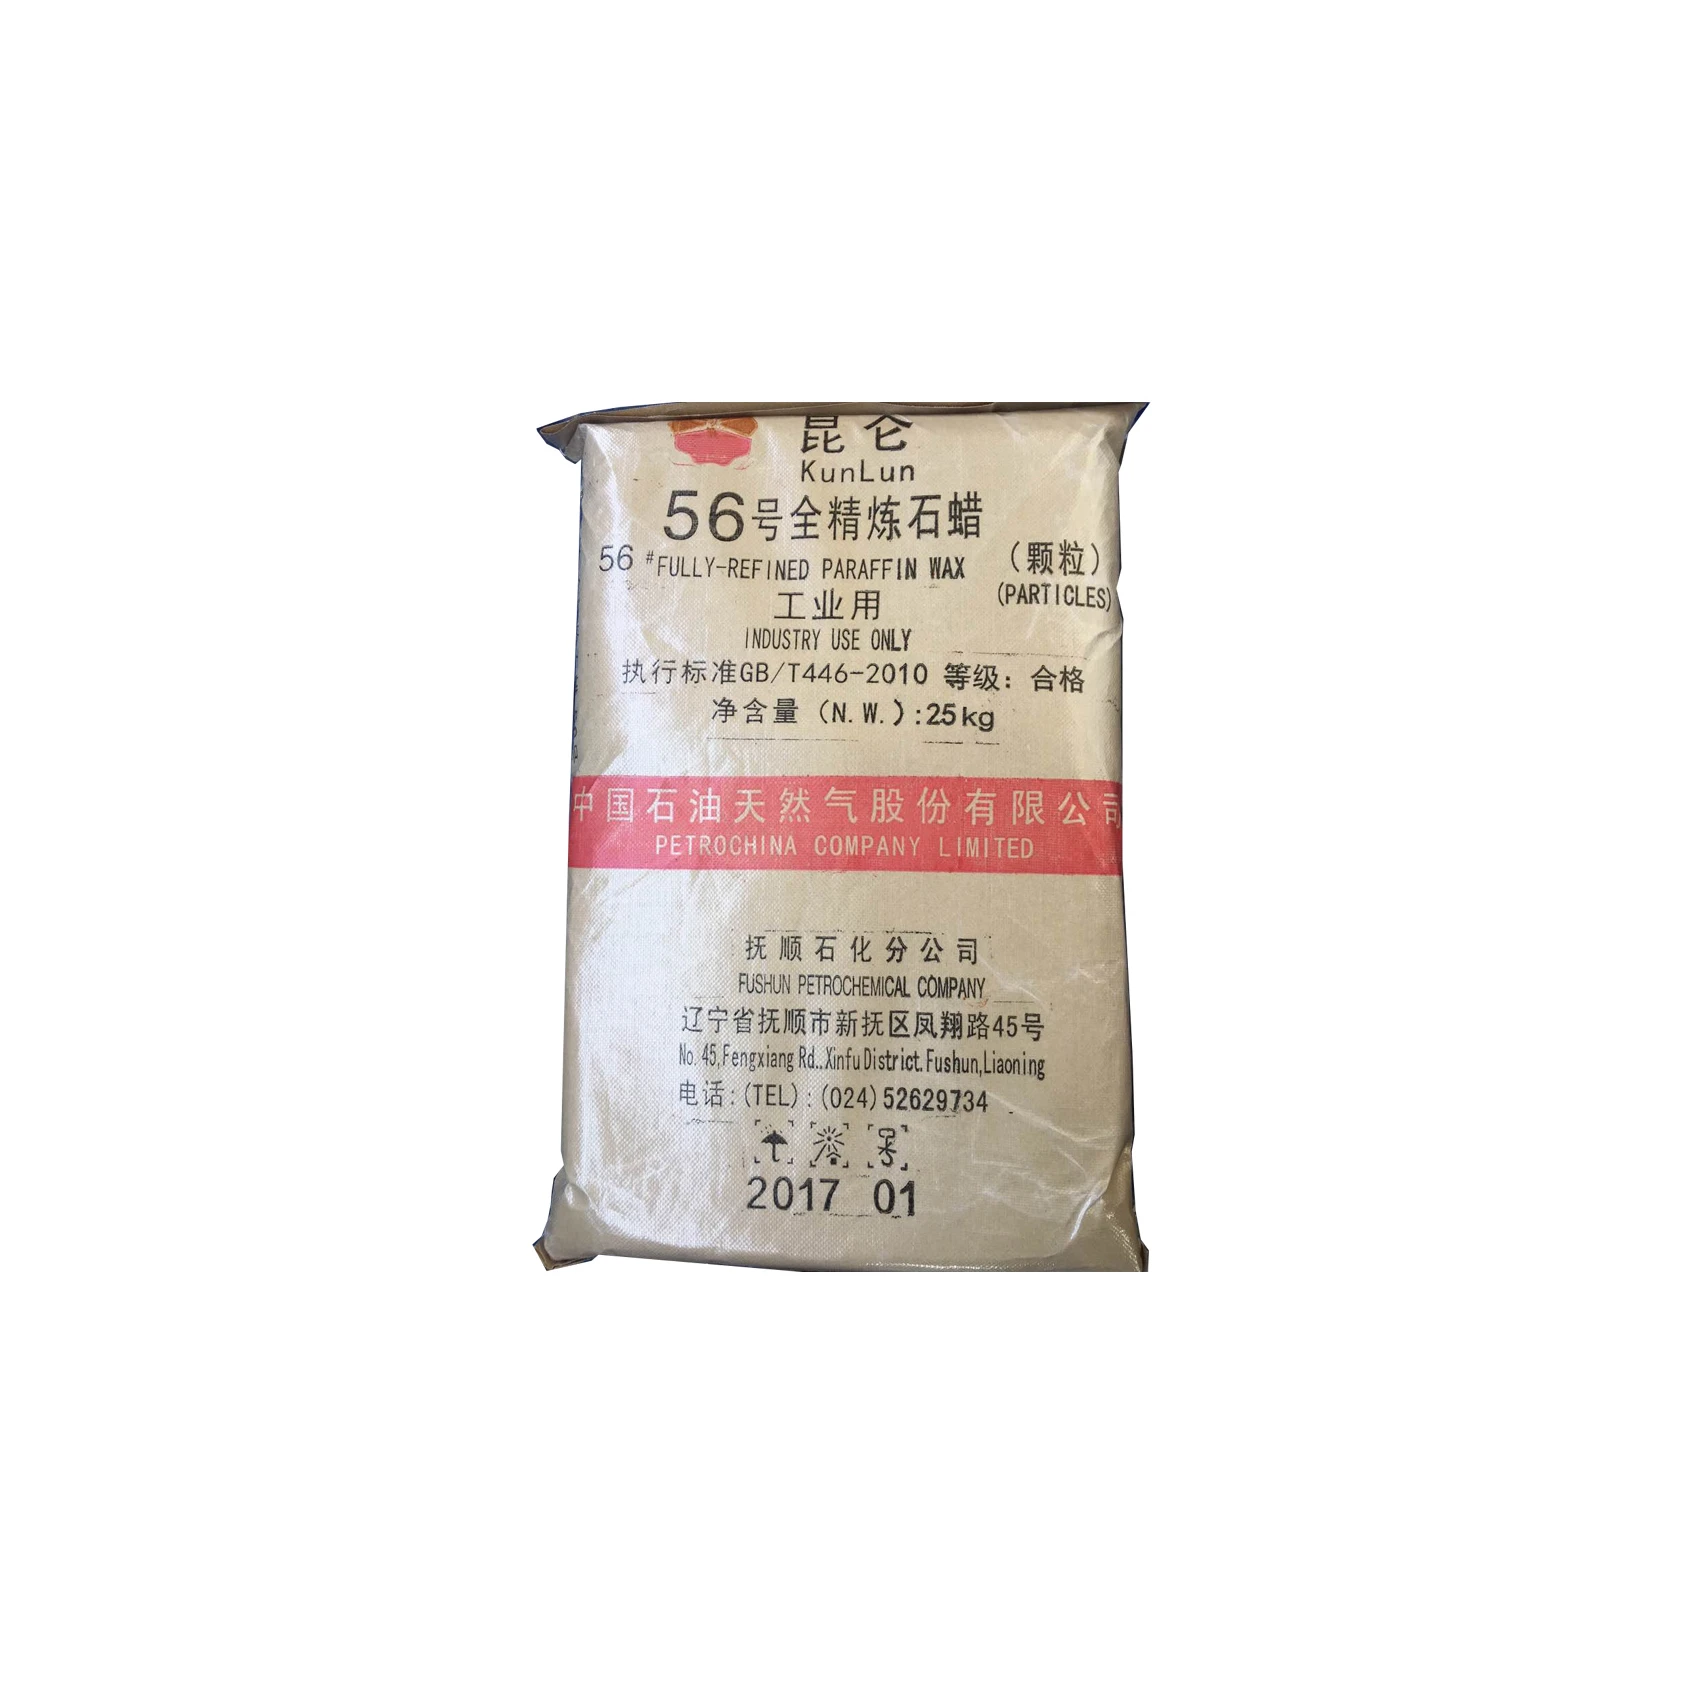 Histology Micronized Scented Pellets Pcm Rt 40  Fully Refined 56 Paraffin Wax Particle Pillar